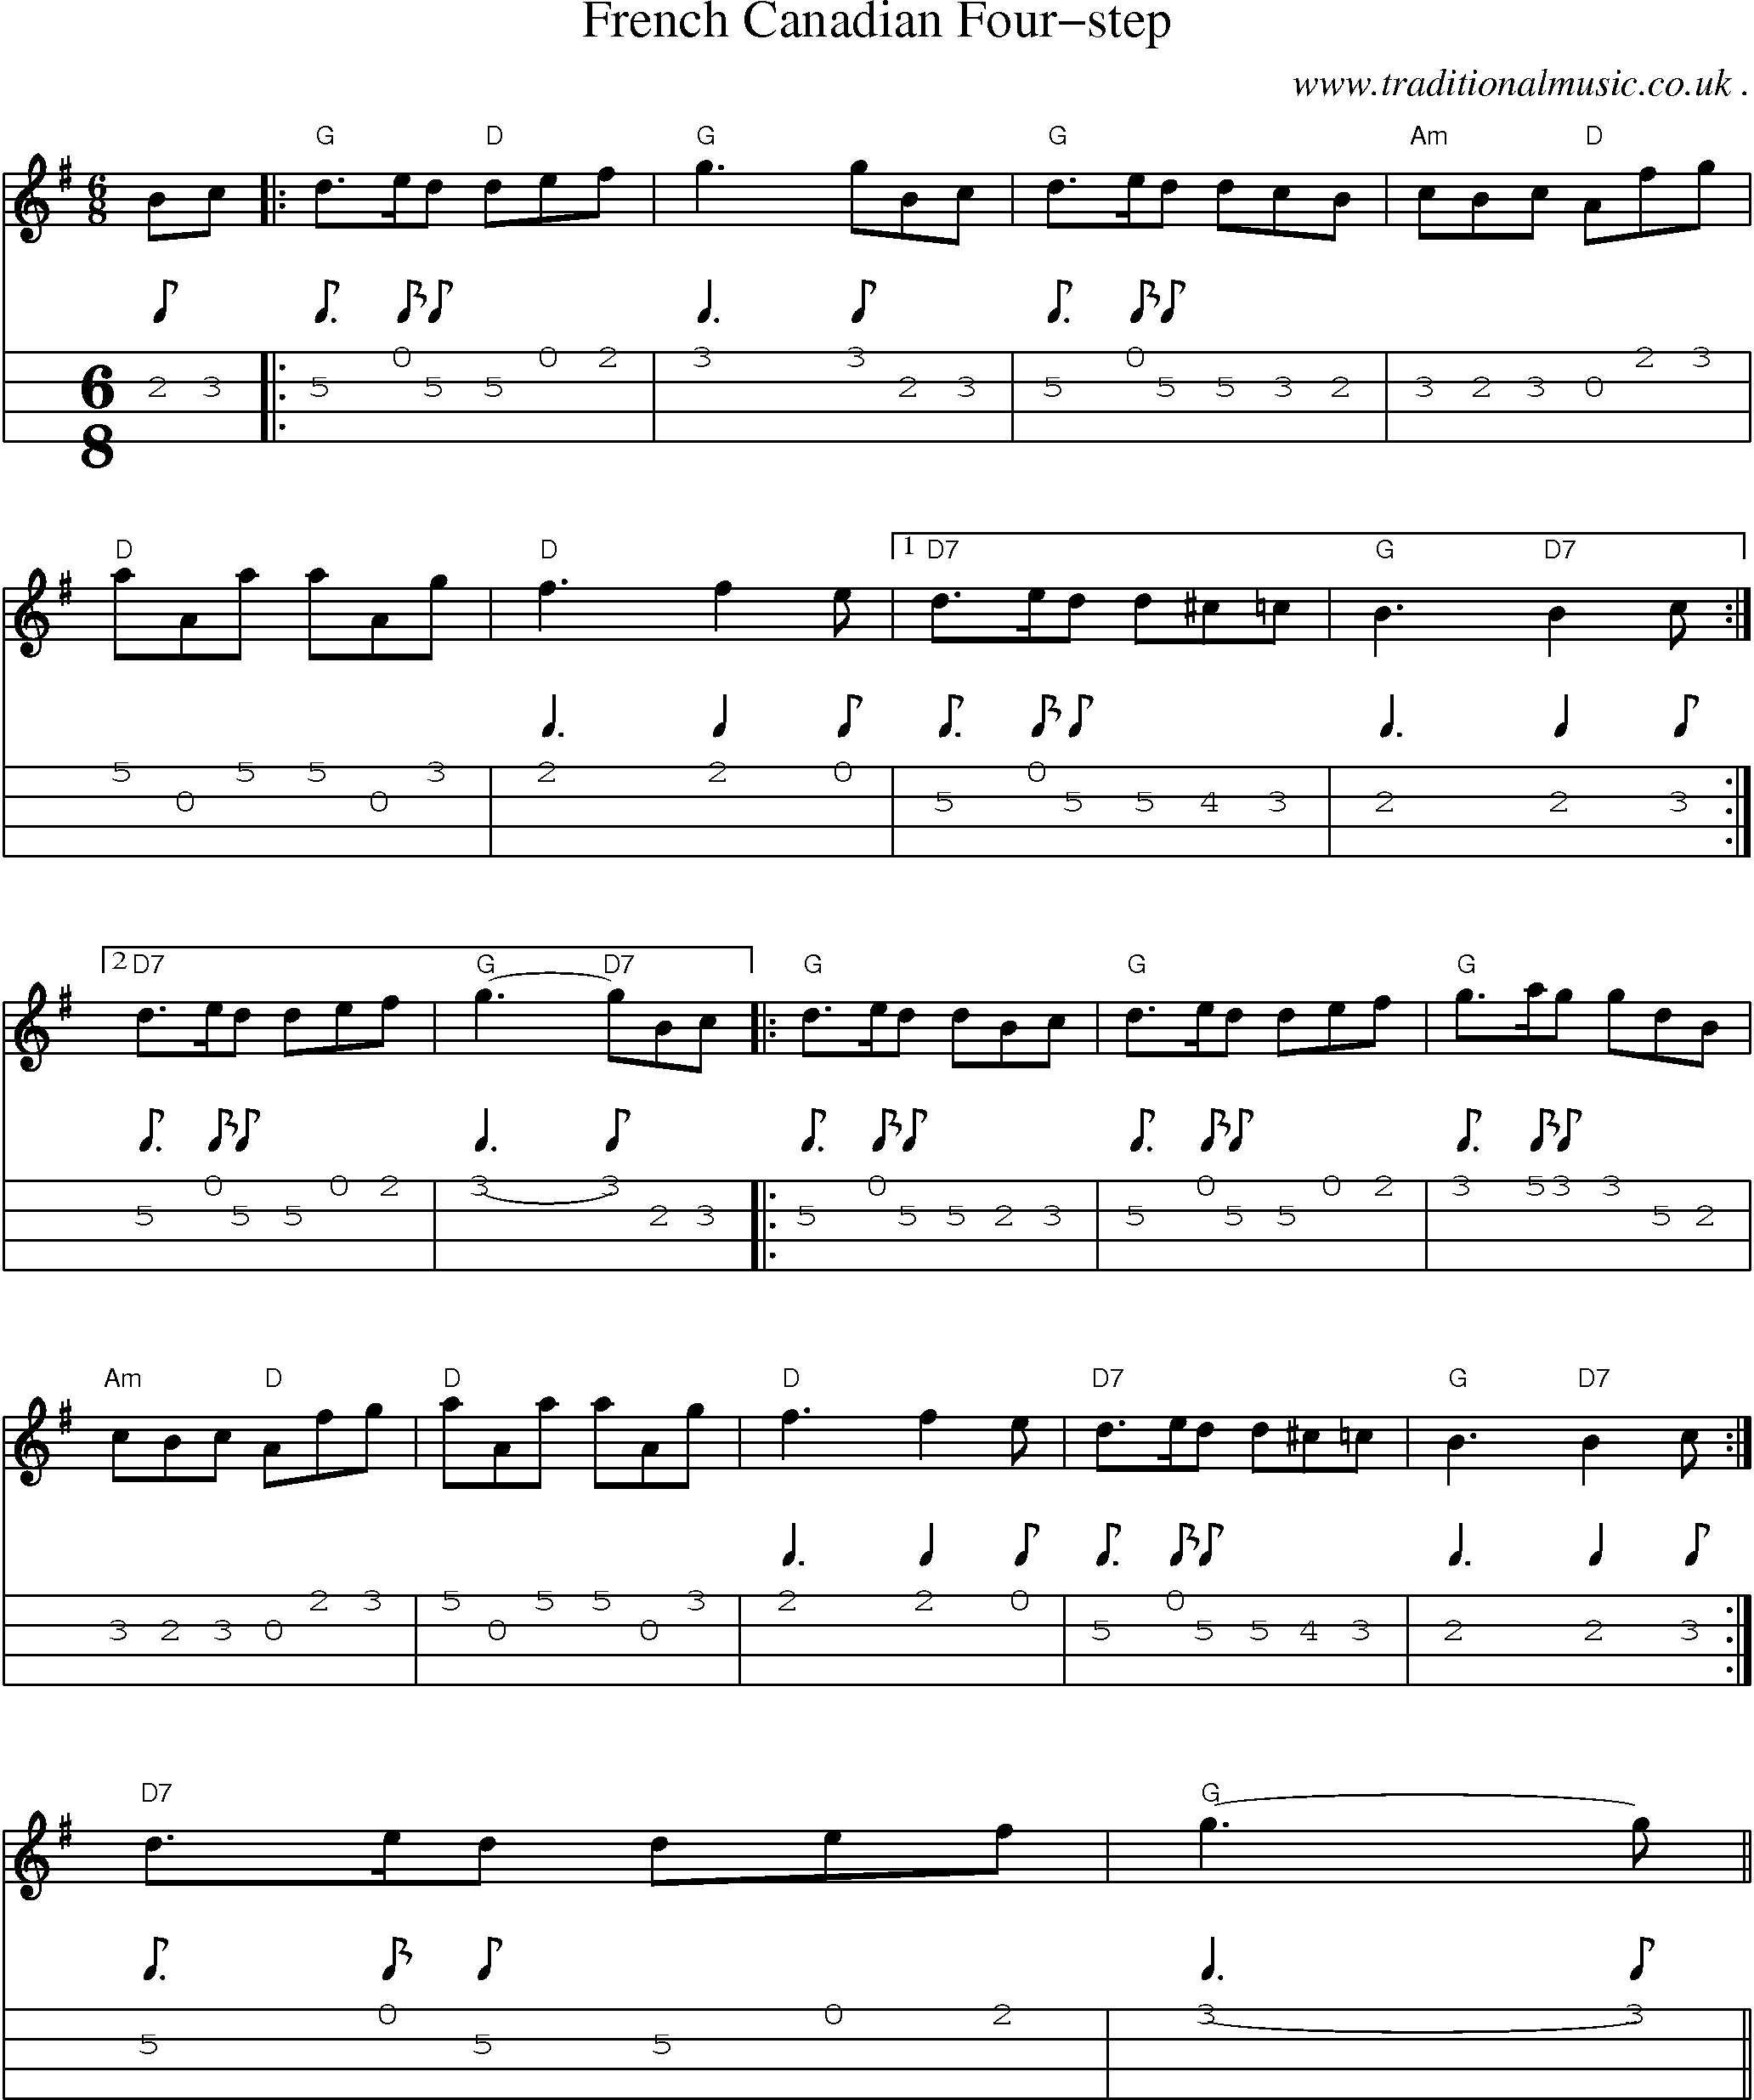 Music Score and Guitar Tabs for French Canadian Four-step